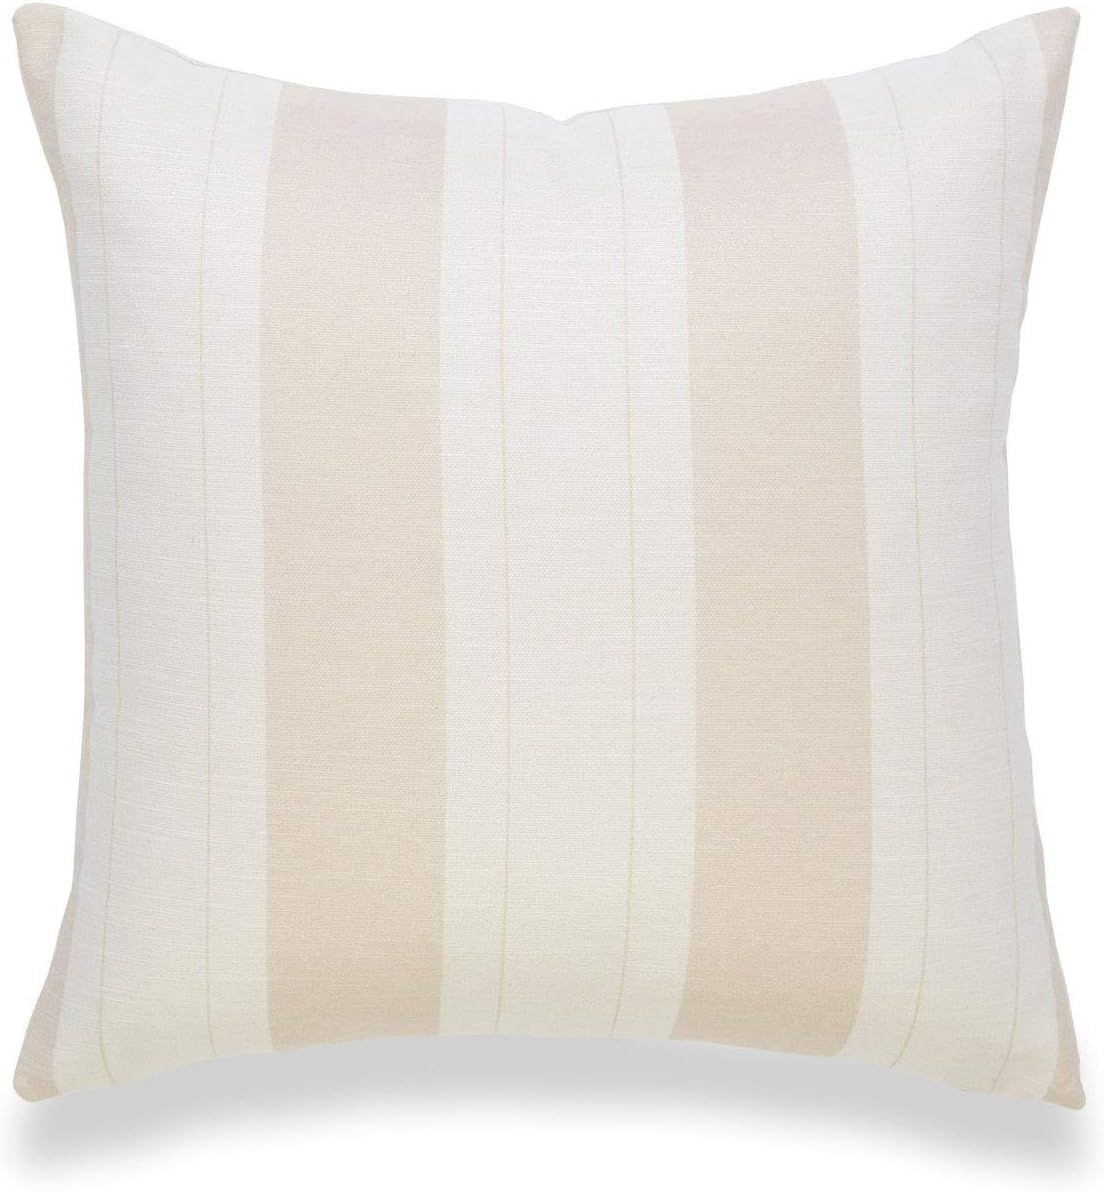 Hofdeco Coastal Decorative Throw Pillow Cover ONLY, for Couch, Sofa, or Bed, Taupe Stripe, 20"x20... | Amazon (US)